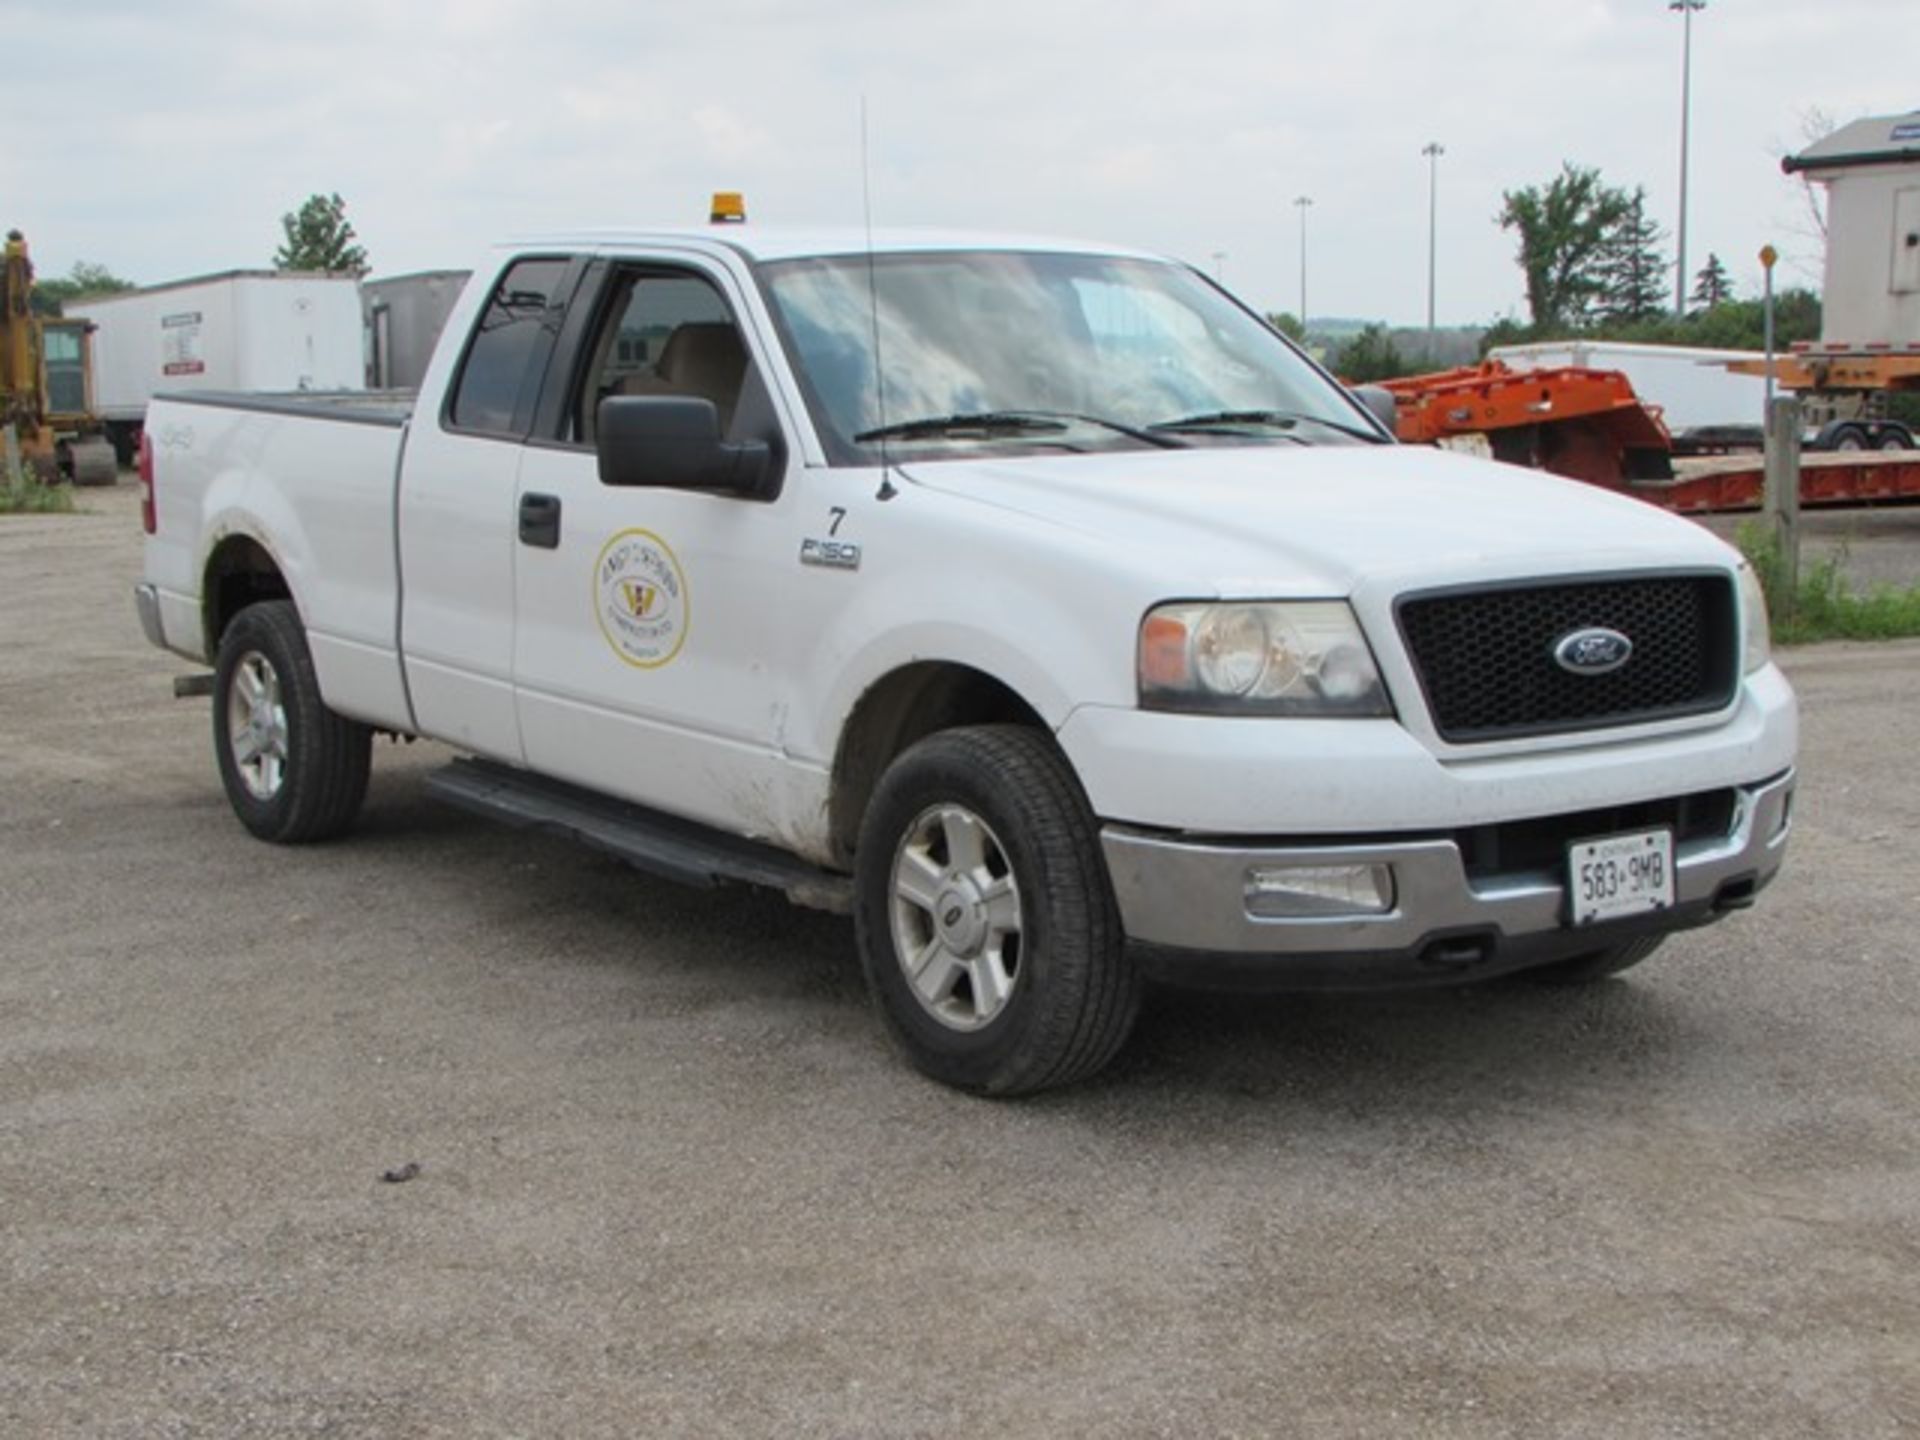 2004 Ford "F-150 XLT" white pick up truck c/w 4X4 traction, 5.4 Triton motor, extended cab VIN # - Image 3 of 6